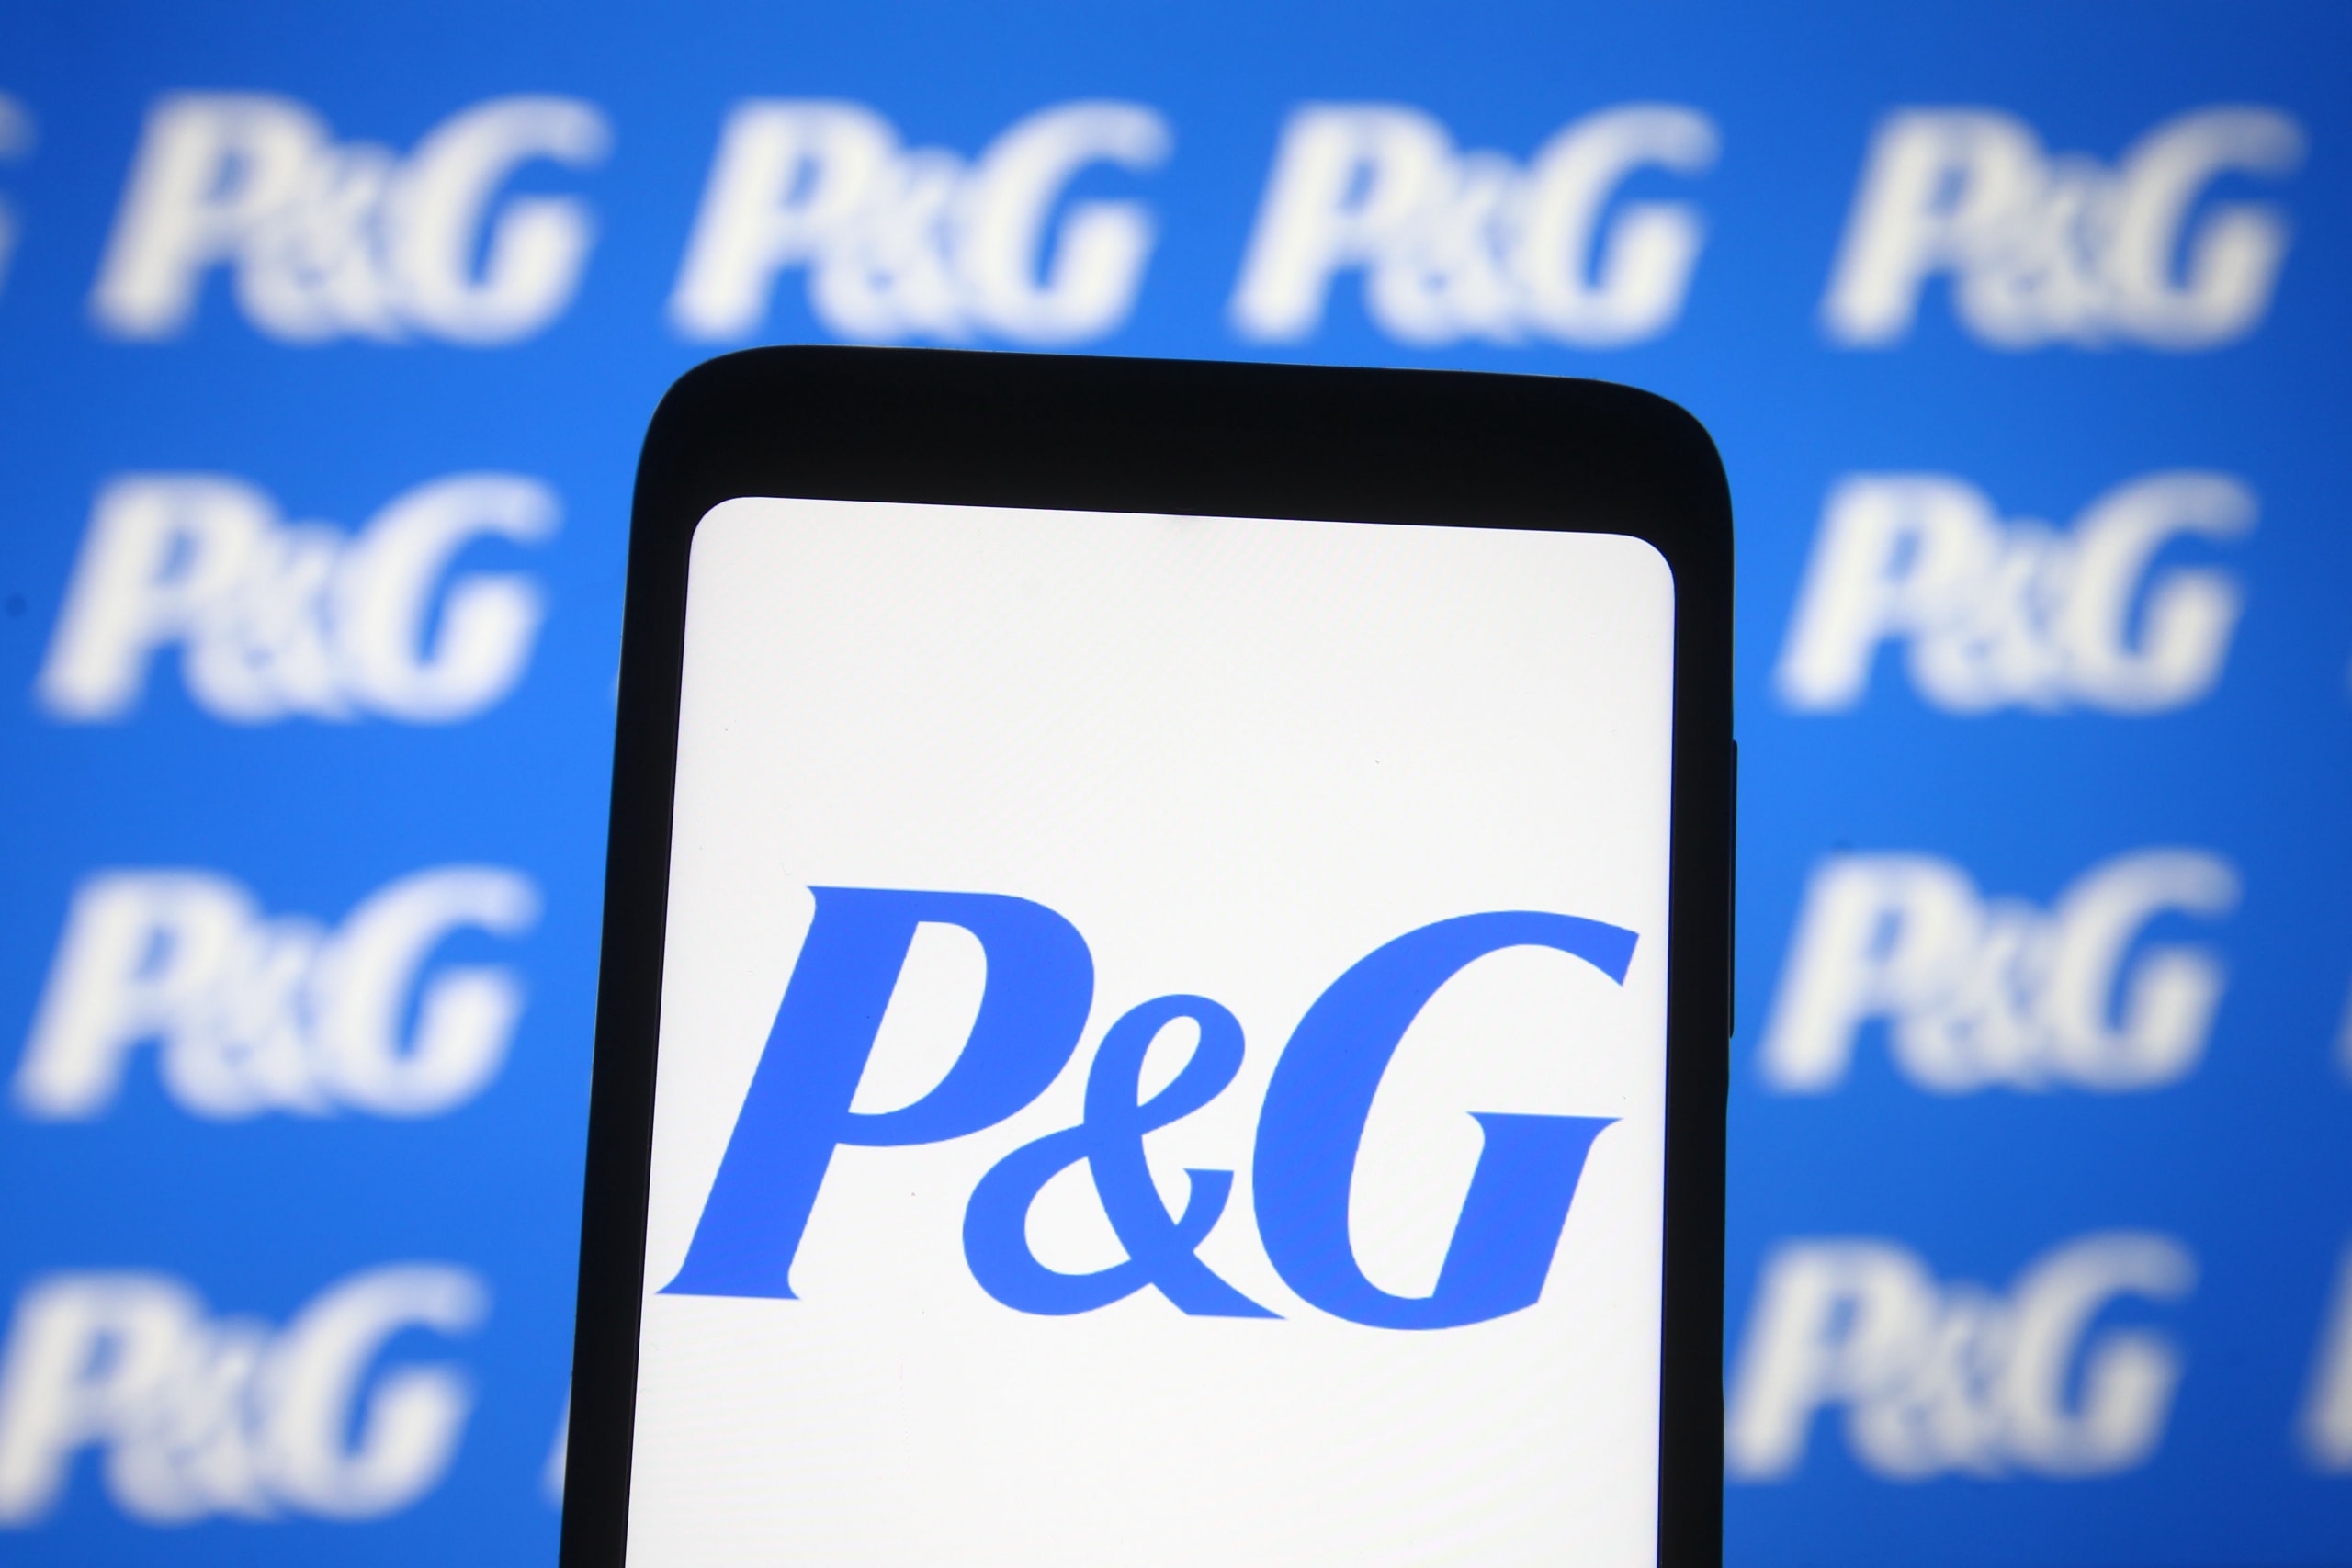 Procter & Gamble Raising Prices in September On goods like diapers and tampons materials raw shortage pulp fmcg economy P&G